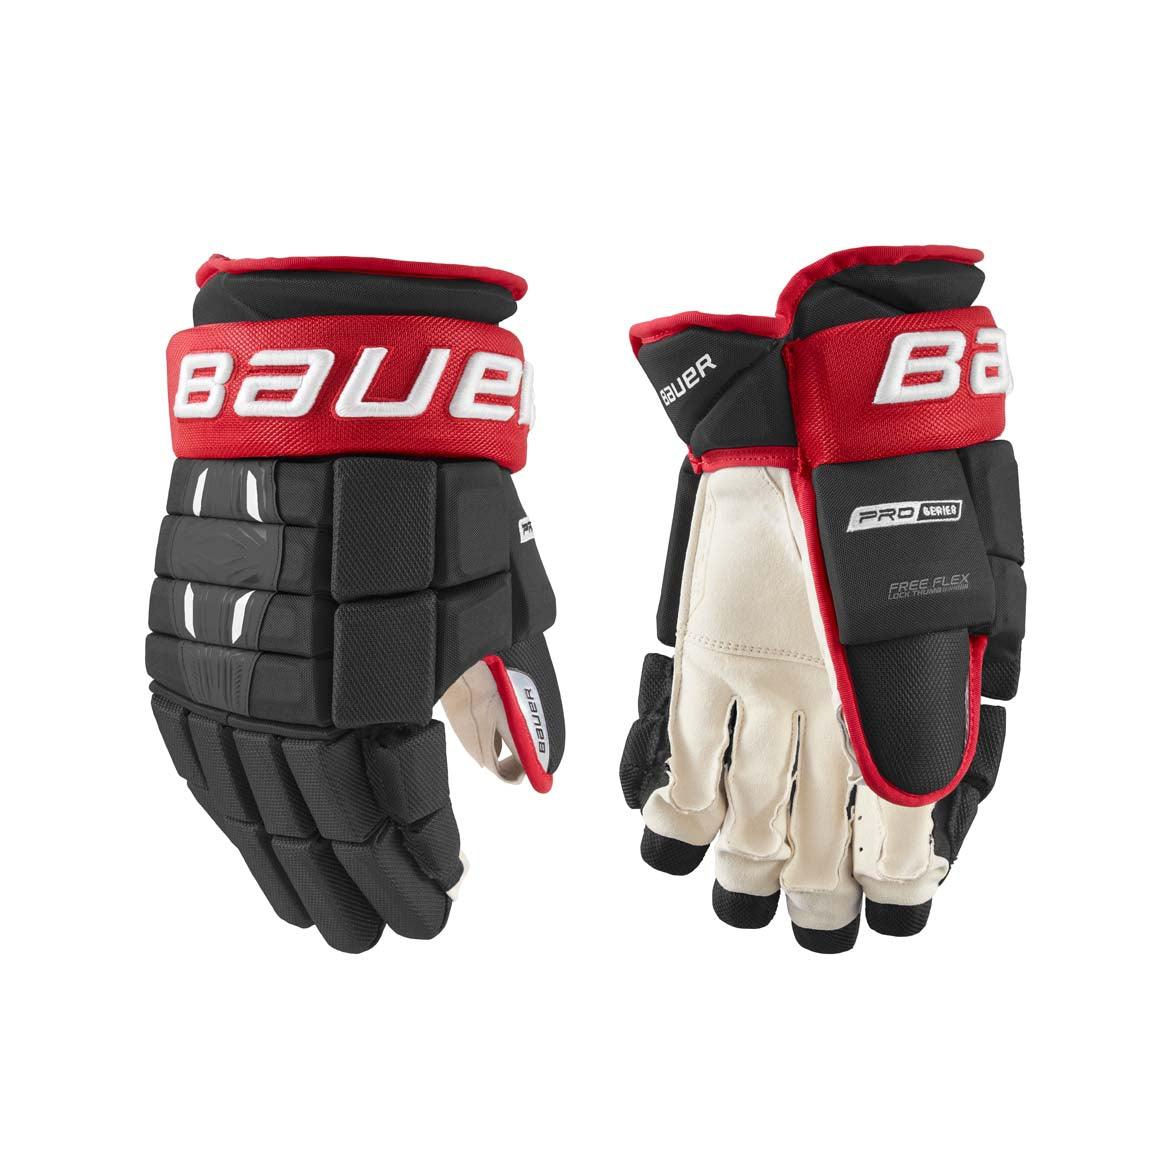 Pro Series Hockey Gloves - Intermediate - Sports Excellence